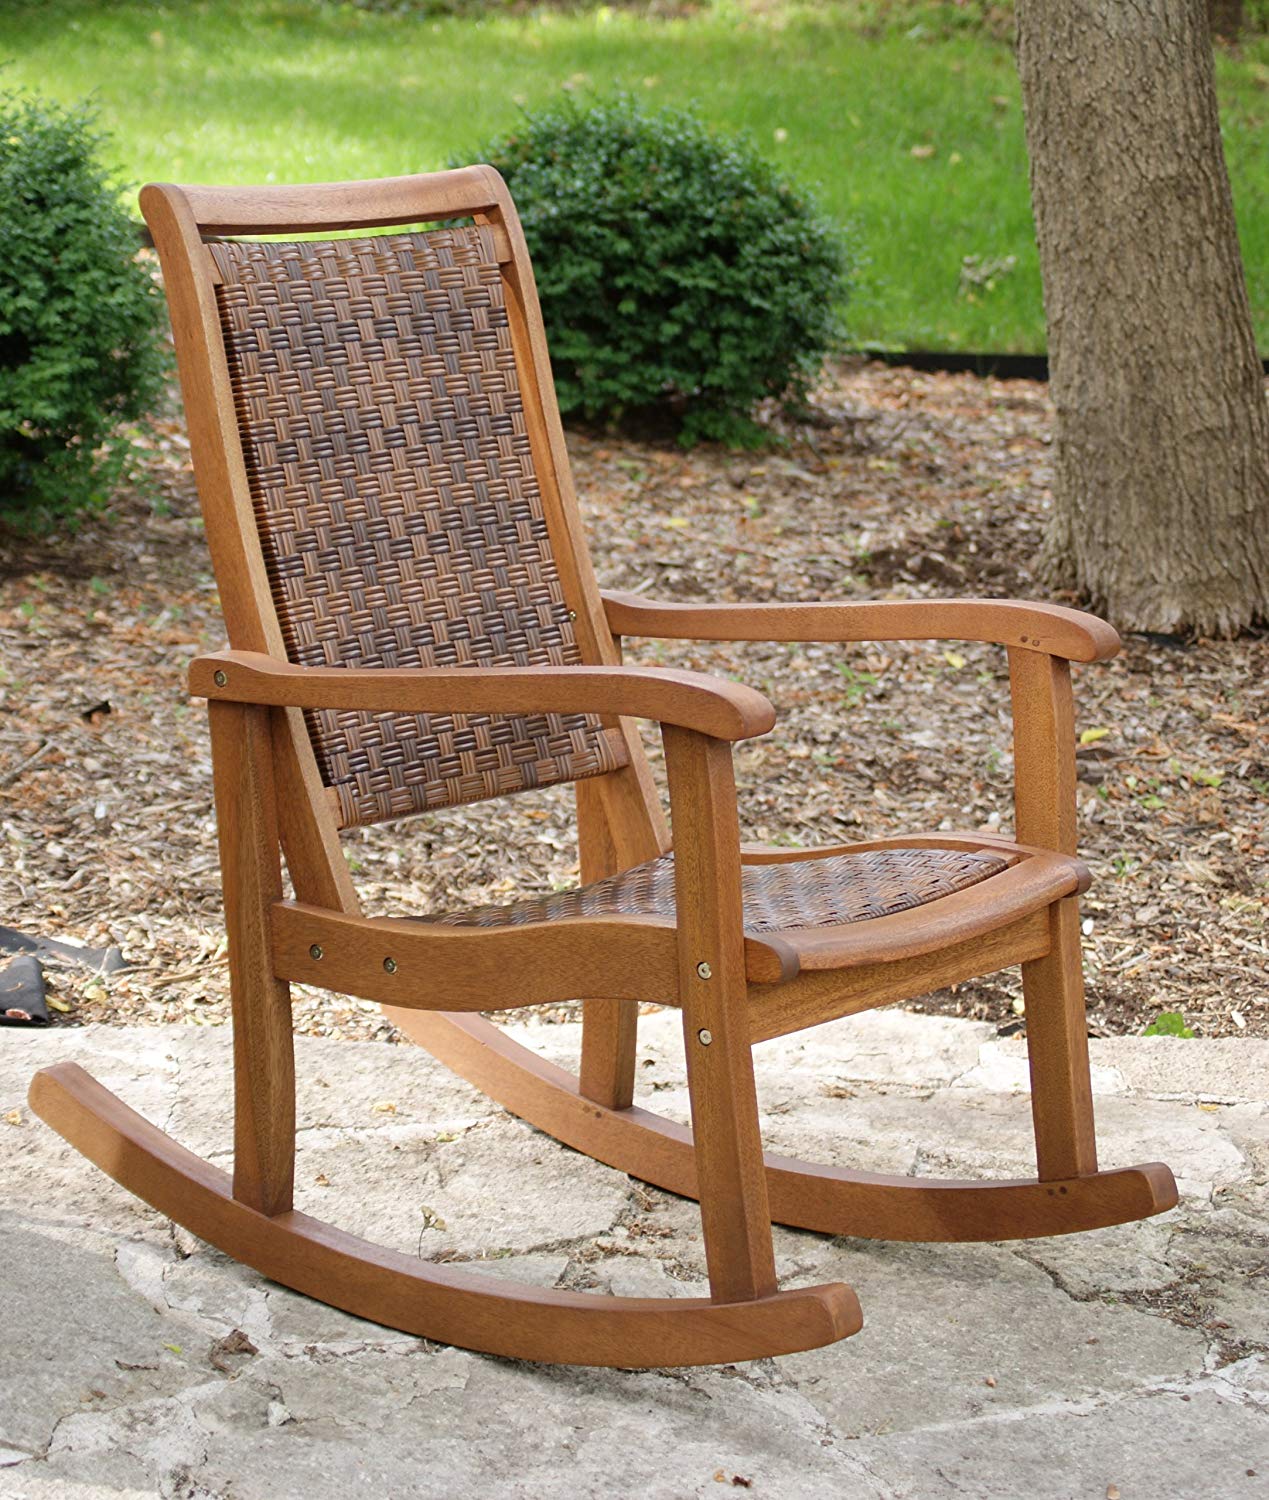 Rocking chairs for outdoors amazon.com: Interior fittings for outdoors 21095rc All Weather Wicker Mocha and Eucalyptus FFHLYXQ